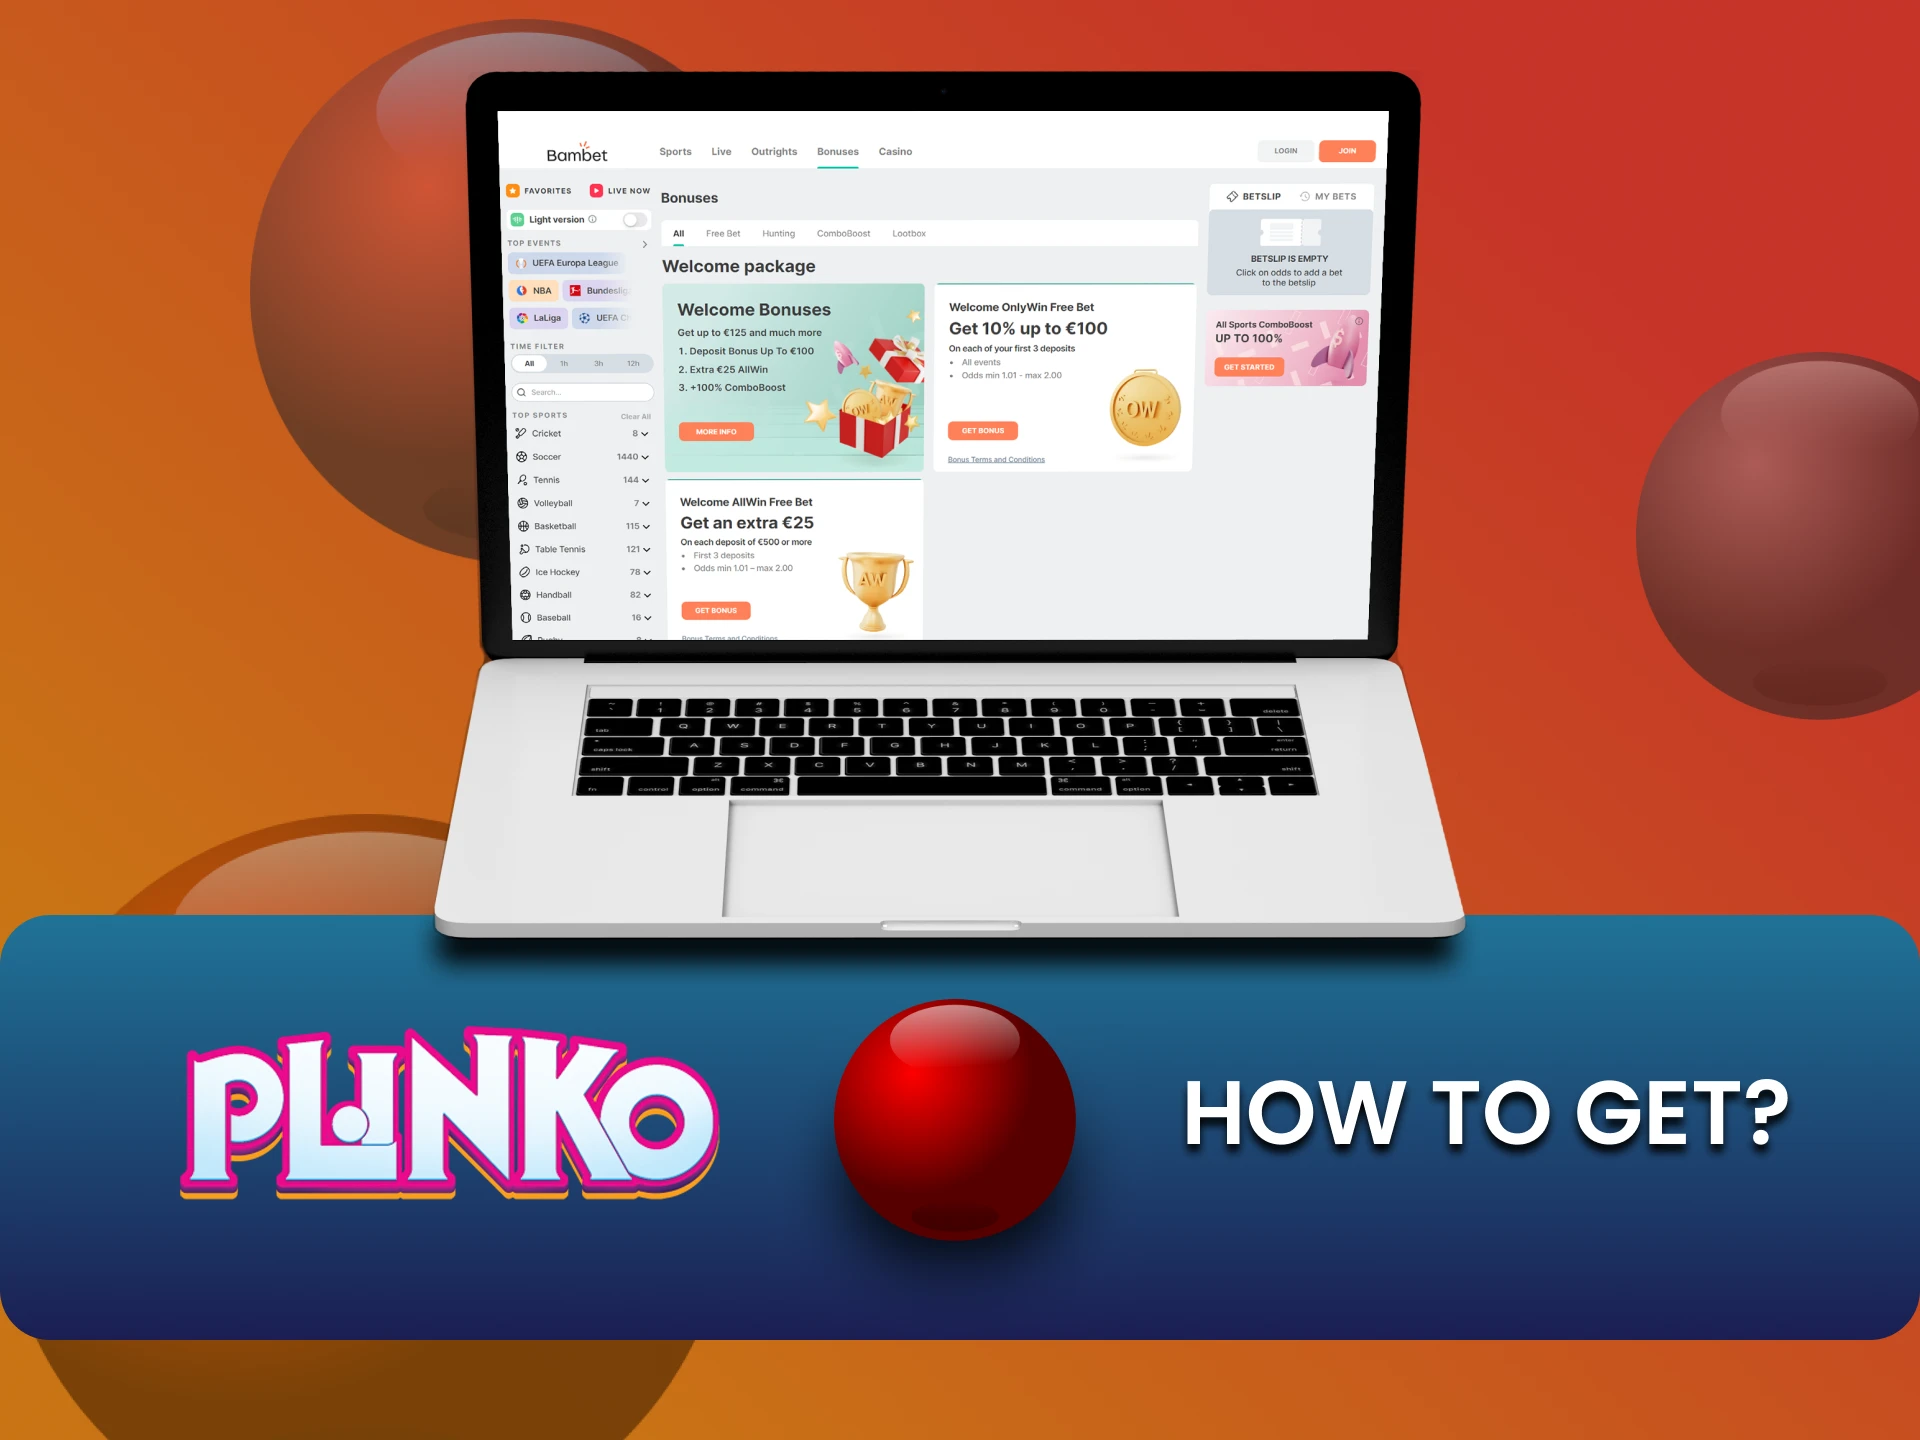 Find out how to get bonuses for playing Plinko.